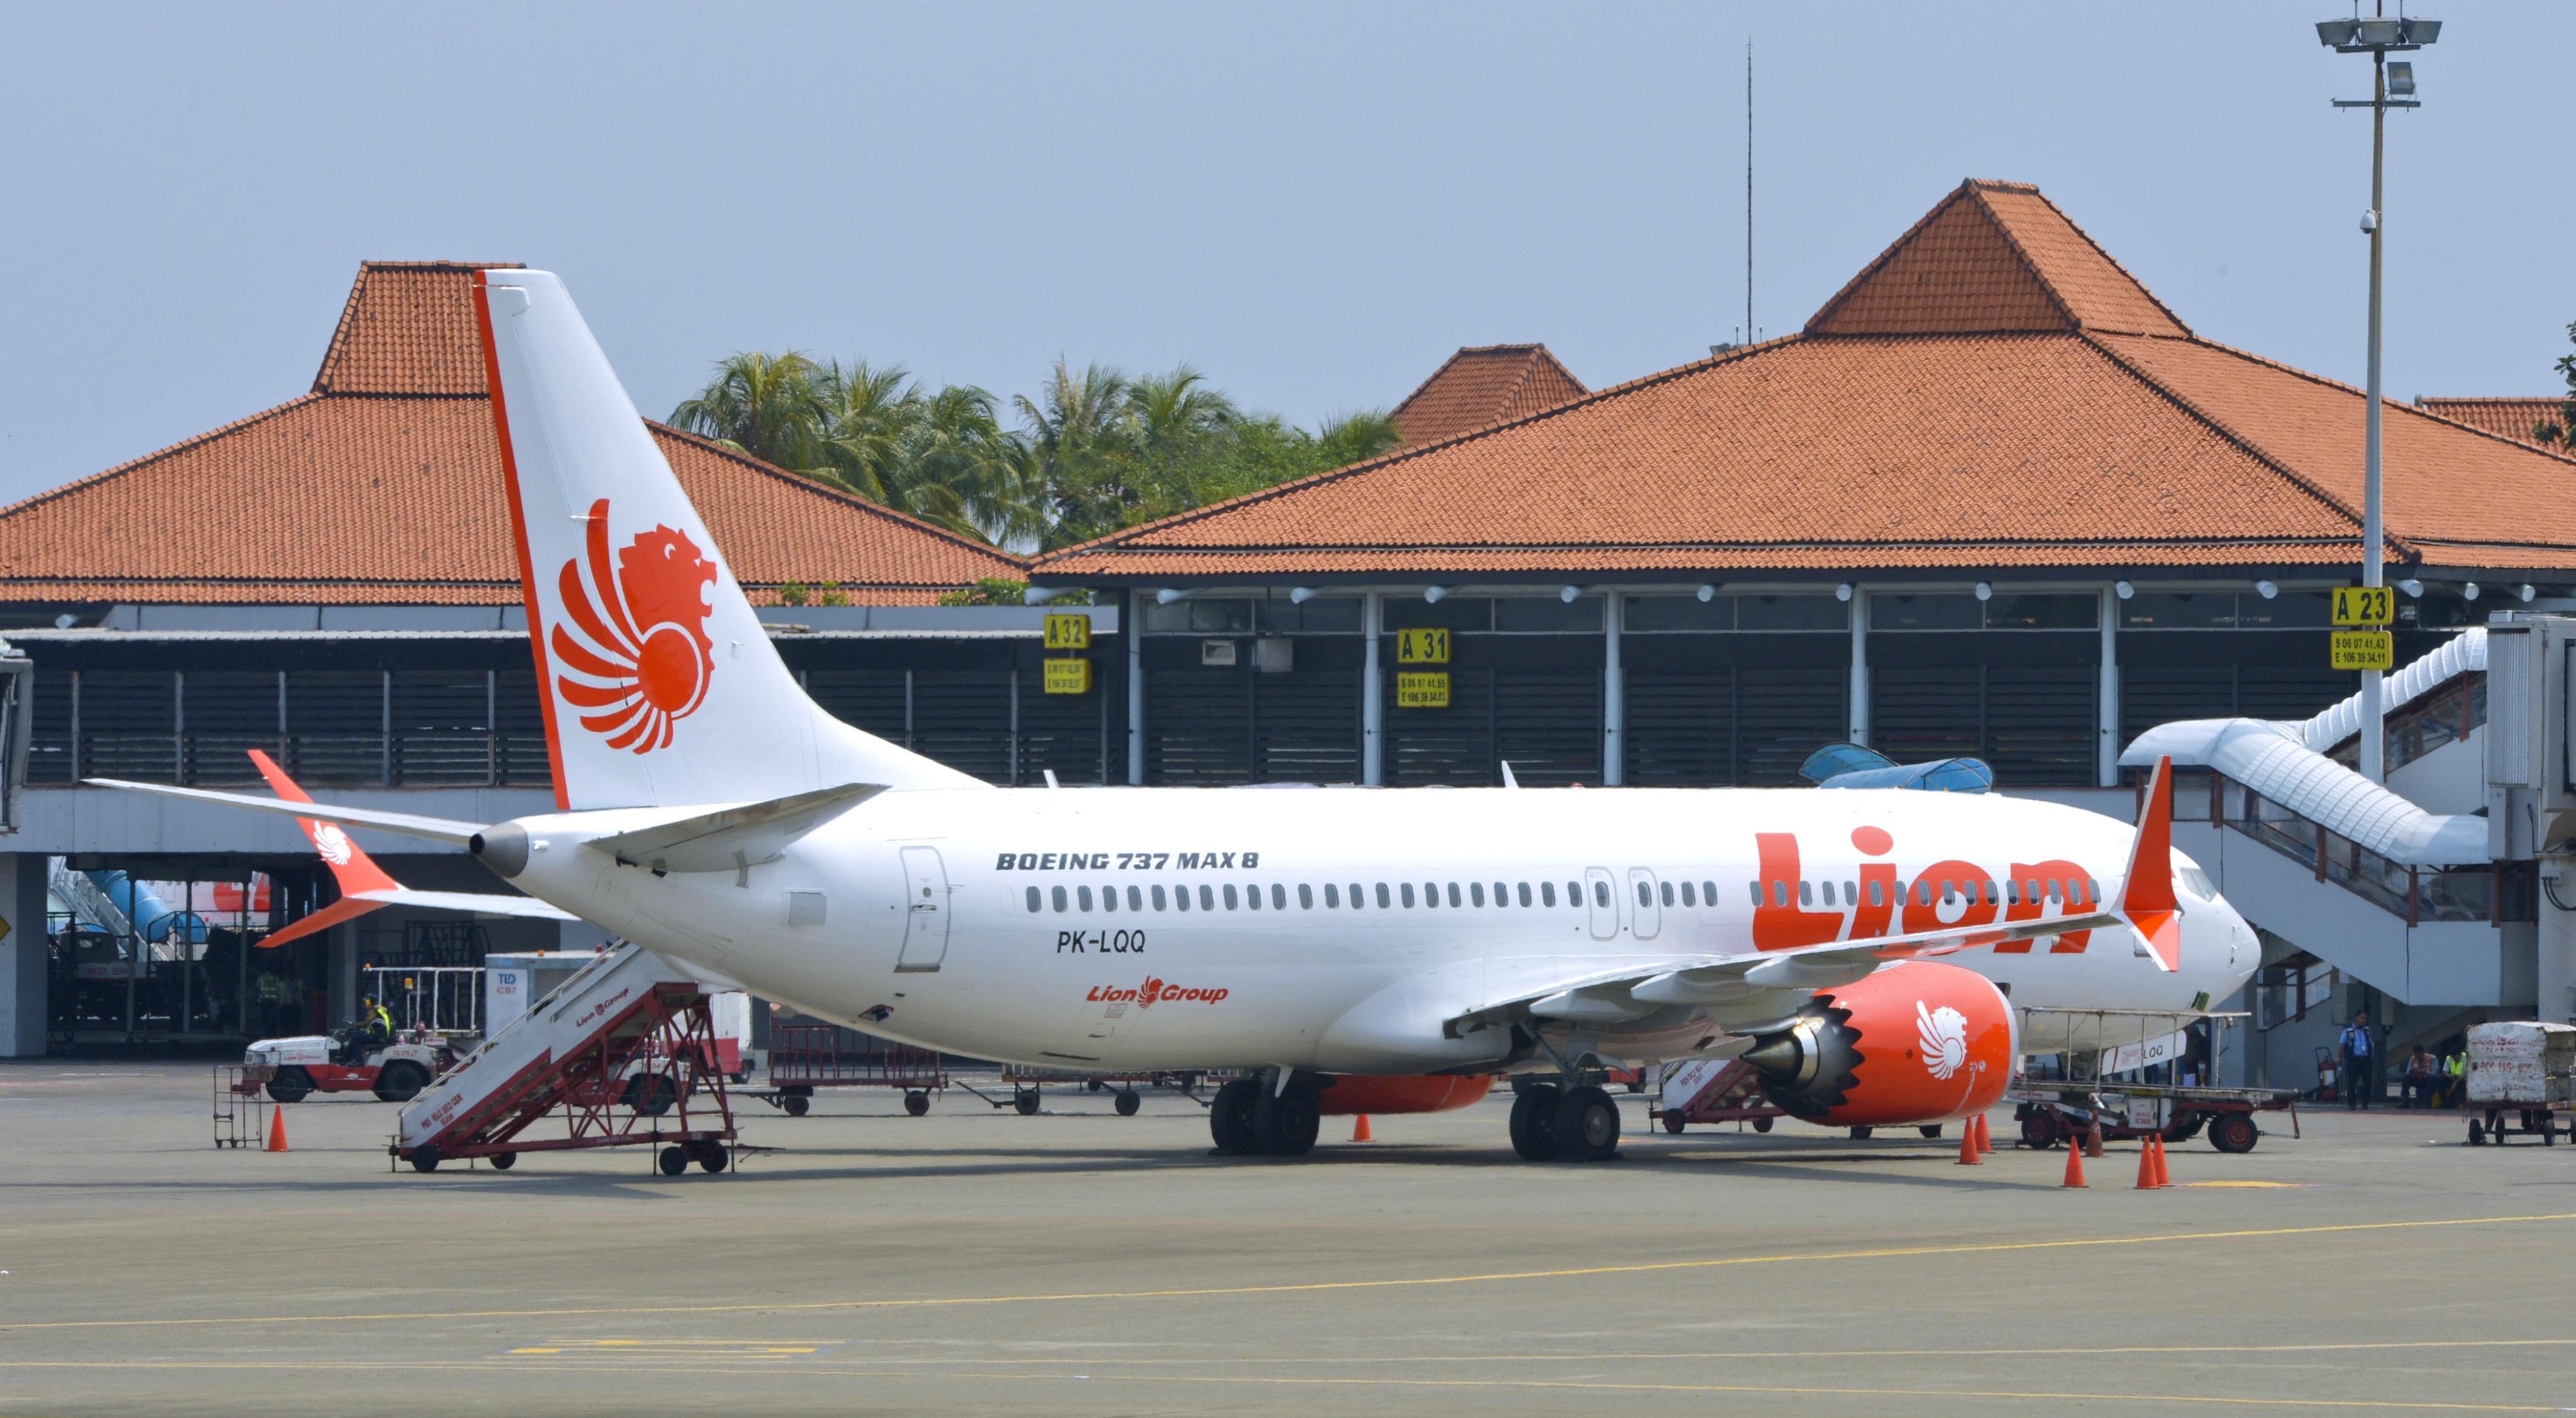 A Lion Air passenger jet of the Boeing 737 MAX 8 series -- the type of jet that crashed -- is seen Monday at the Jakarta Airport.